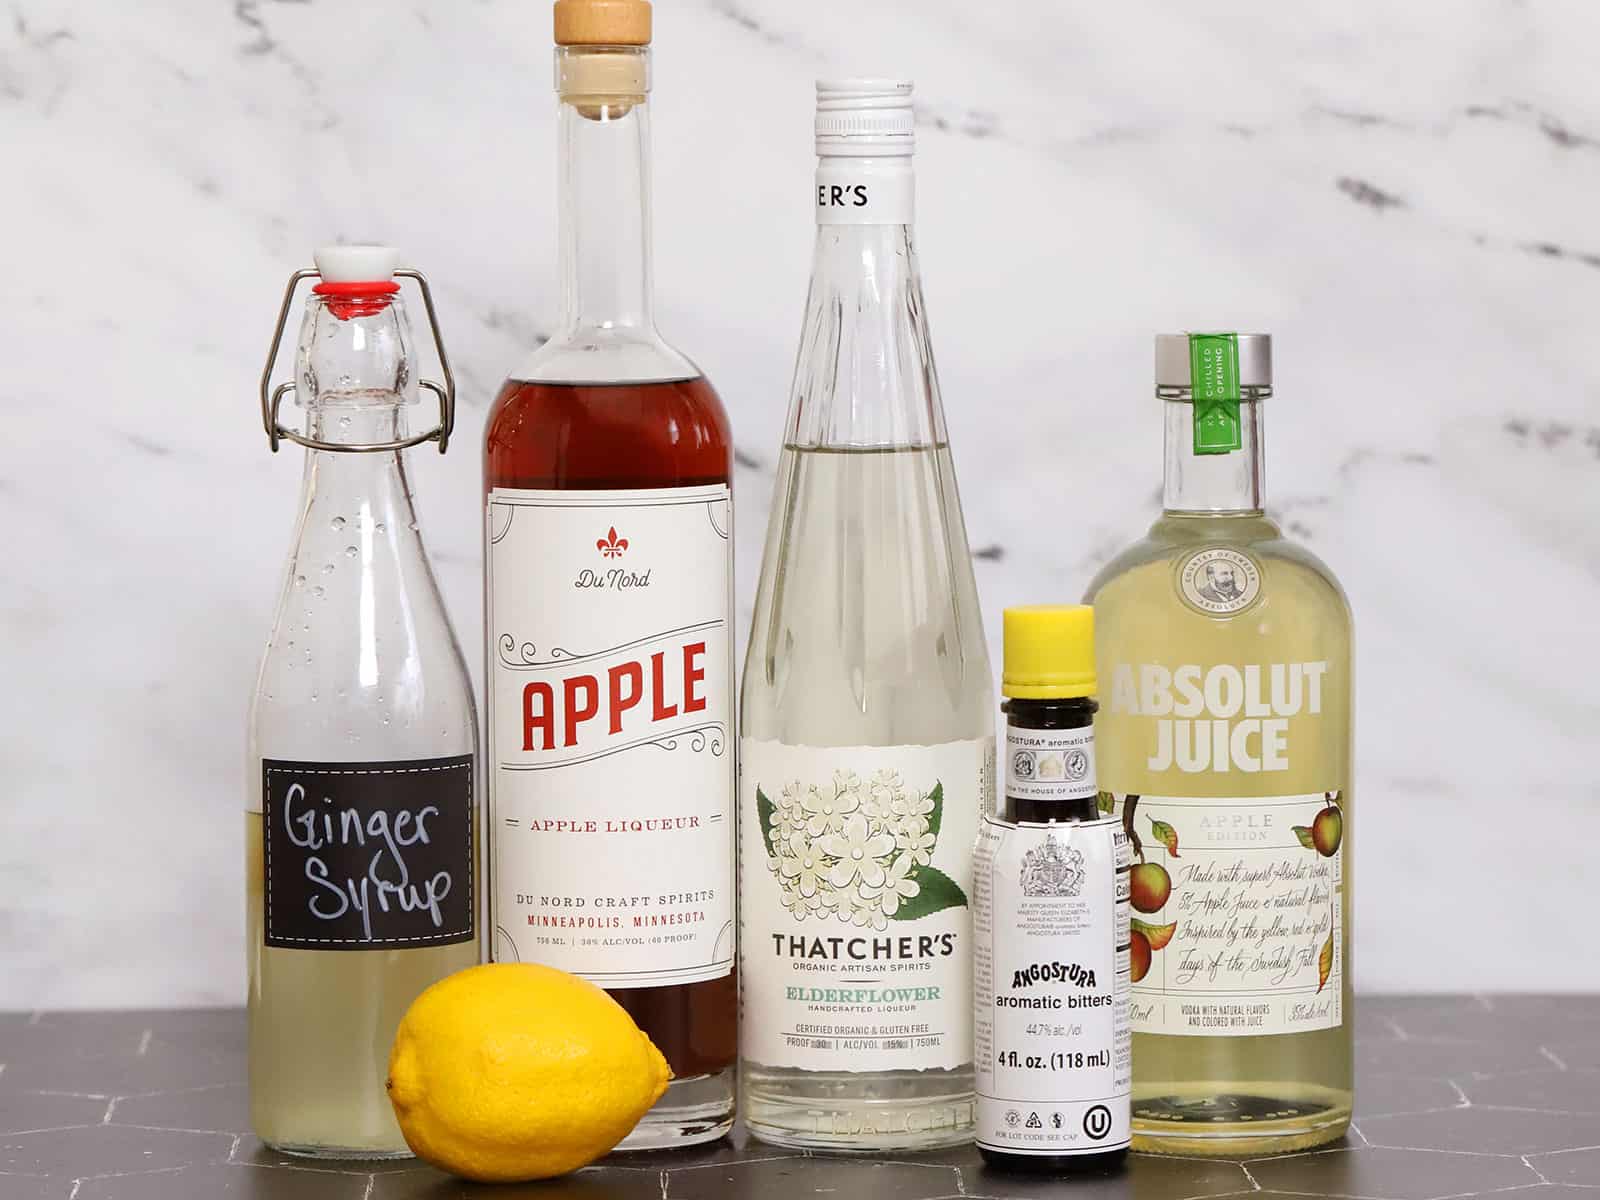 Ingredients for an Apple Orchard Cocktail